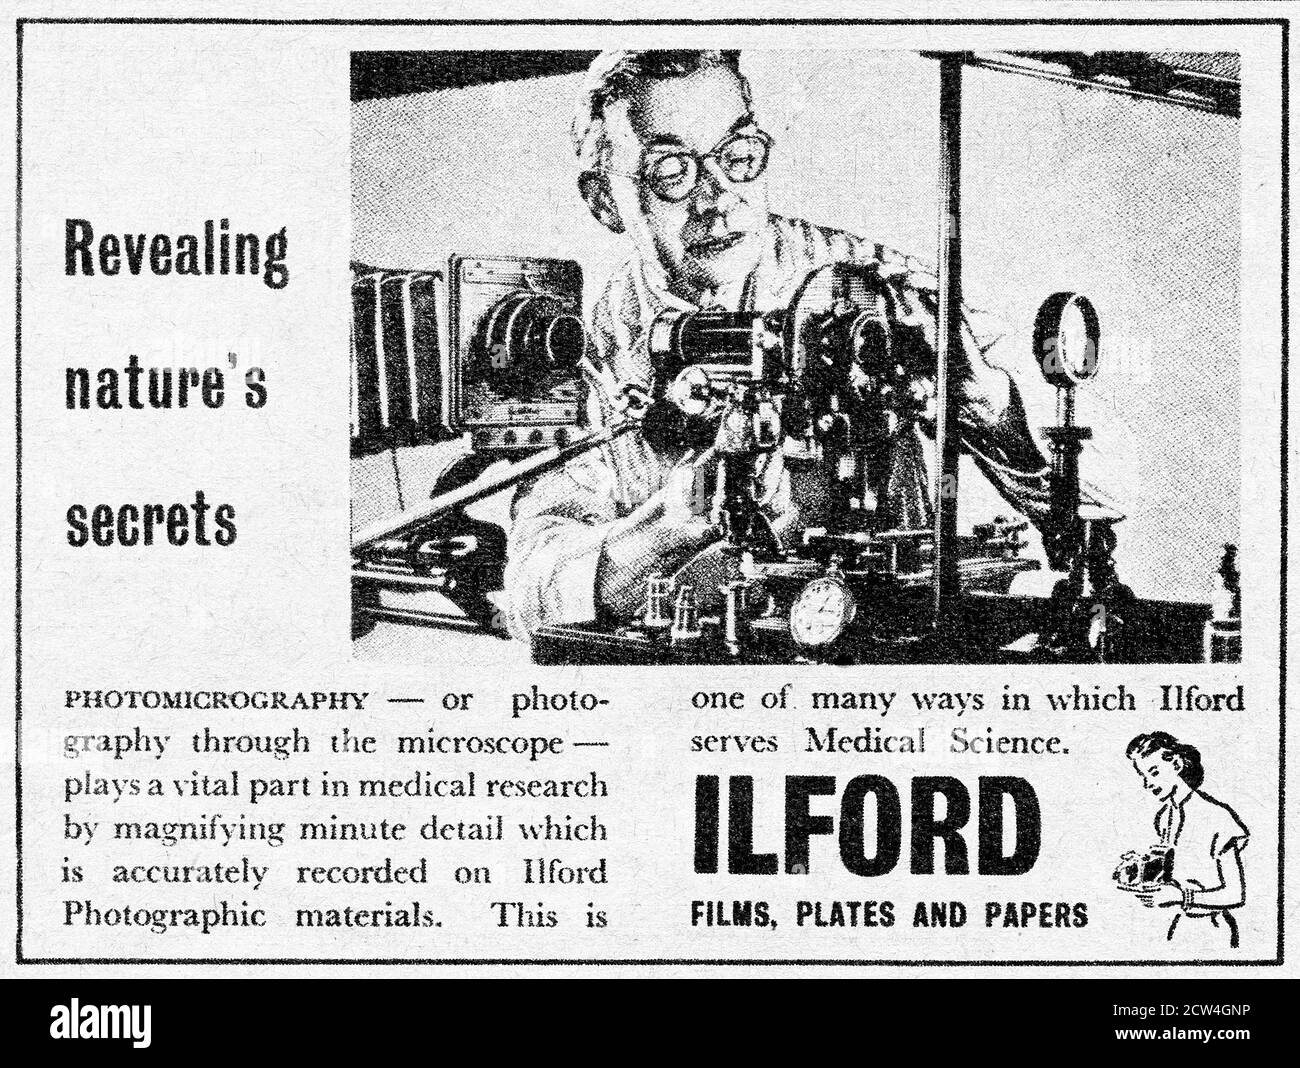 Ilford magazine advertisement, films, plates, papers Stock Photo